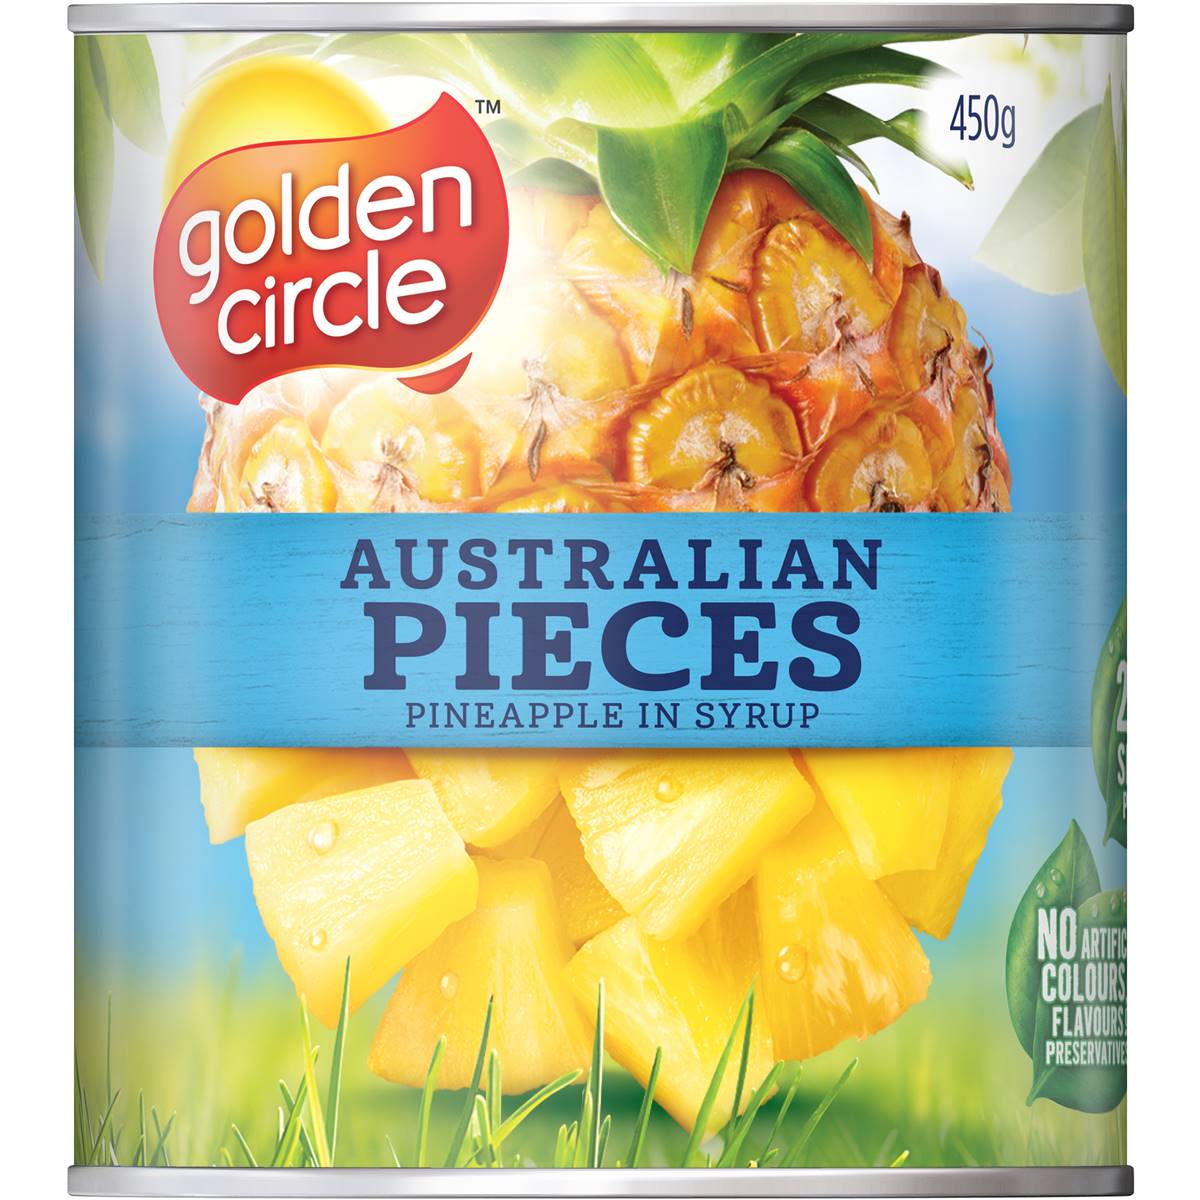 Golden Circle Pineapple in Syrup Pieces 450g